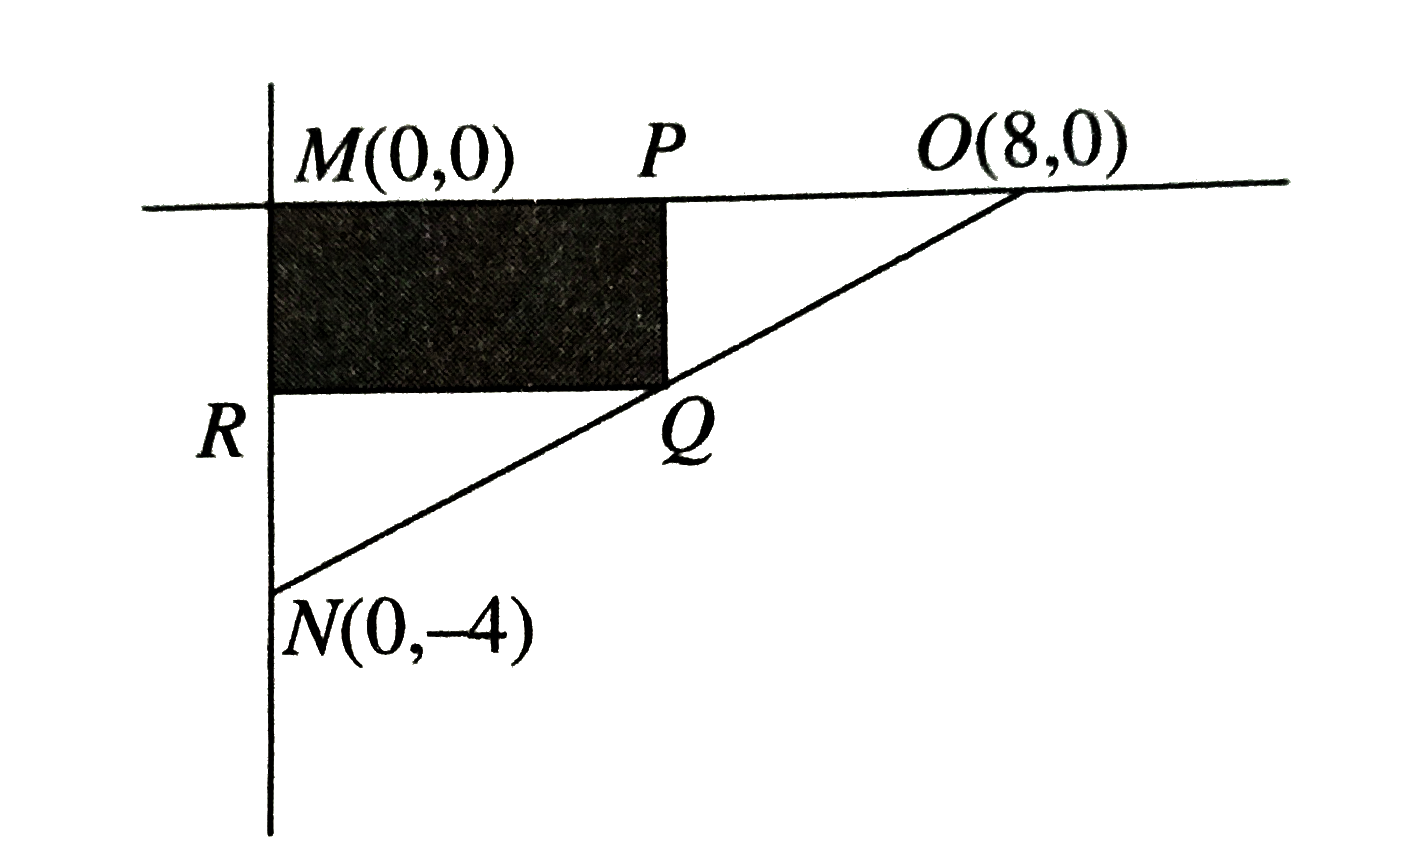 The  coordinates  of the  vertices  of Delta  MON are  shown  in the  standard  ( x,y)  coordination  plane  below  . Rectangle  MPQR  is shown  shaded .  Point  P lies  on bar(MO), point  Q lies  on  bar(MN  )       What  is the  slope  of  bar(ON )  ?